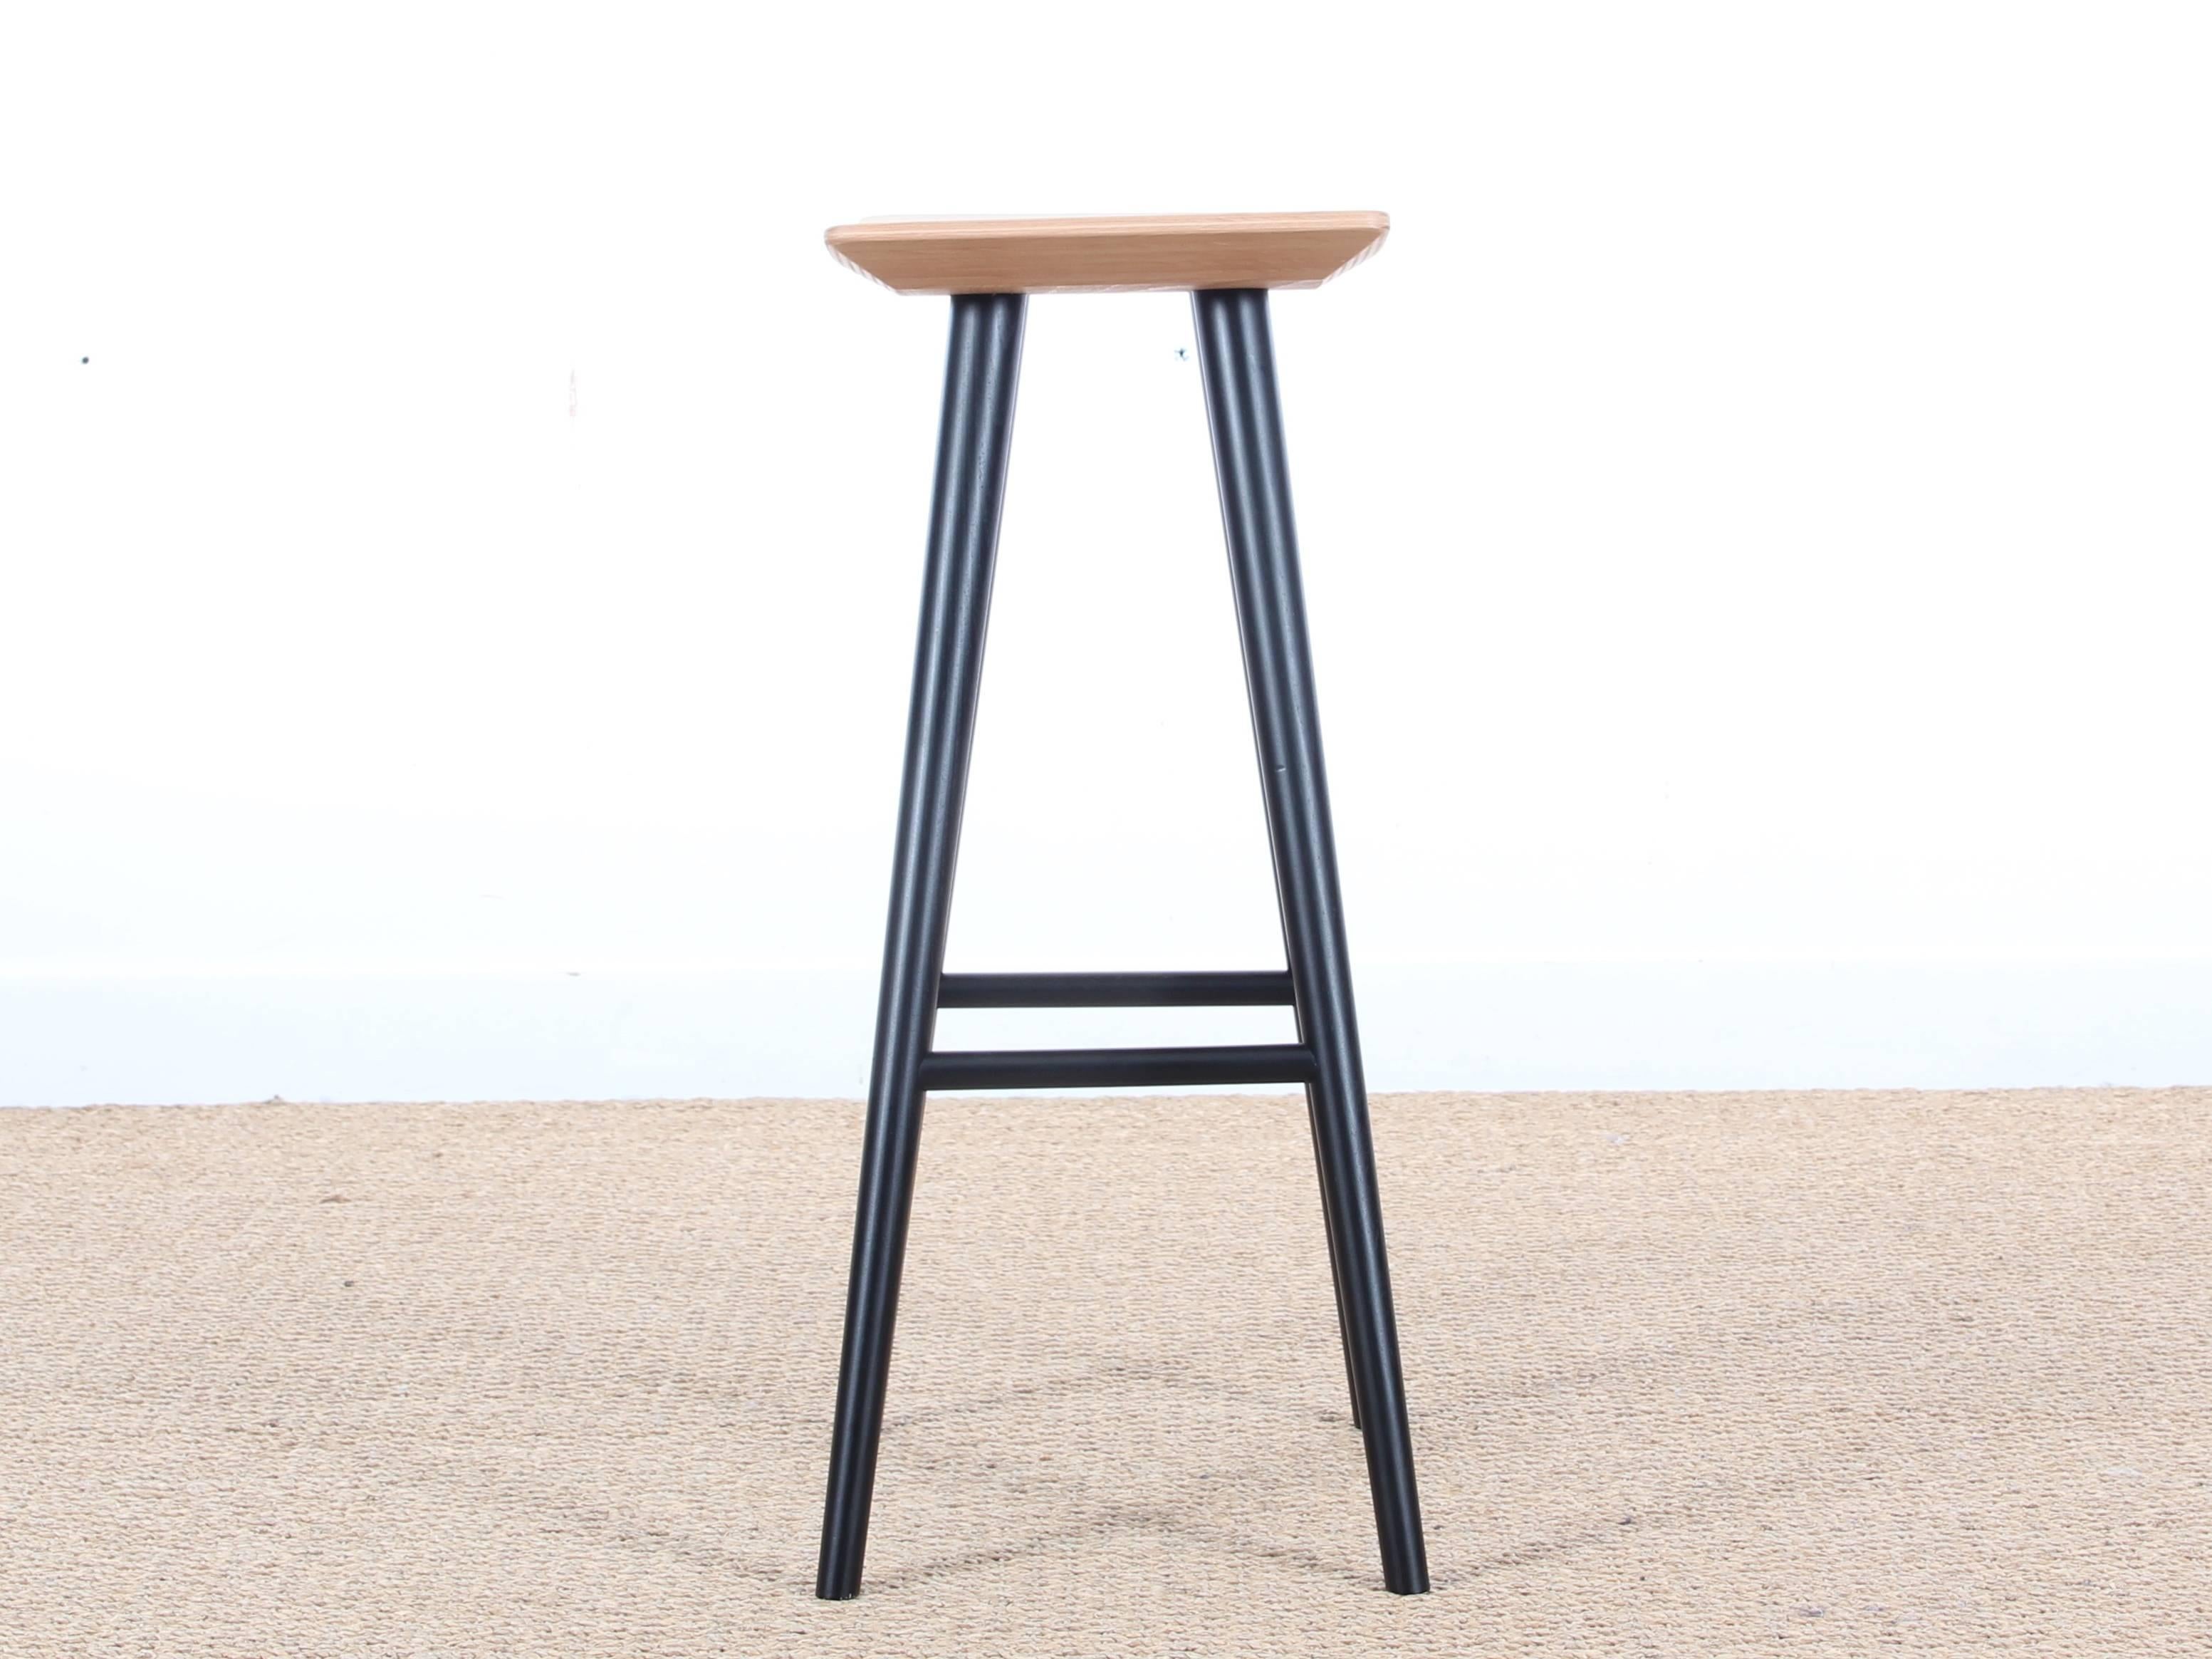 Mid-Century Modern Danish bar stool in beech model Mikado by Foersom et Hiort-Lorenzen for FDB. New realese. Base in black laquered beech. Seat in natural beech. On demand only. Delivery time 6/8 weeks.